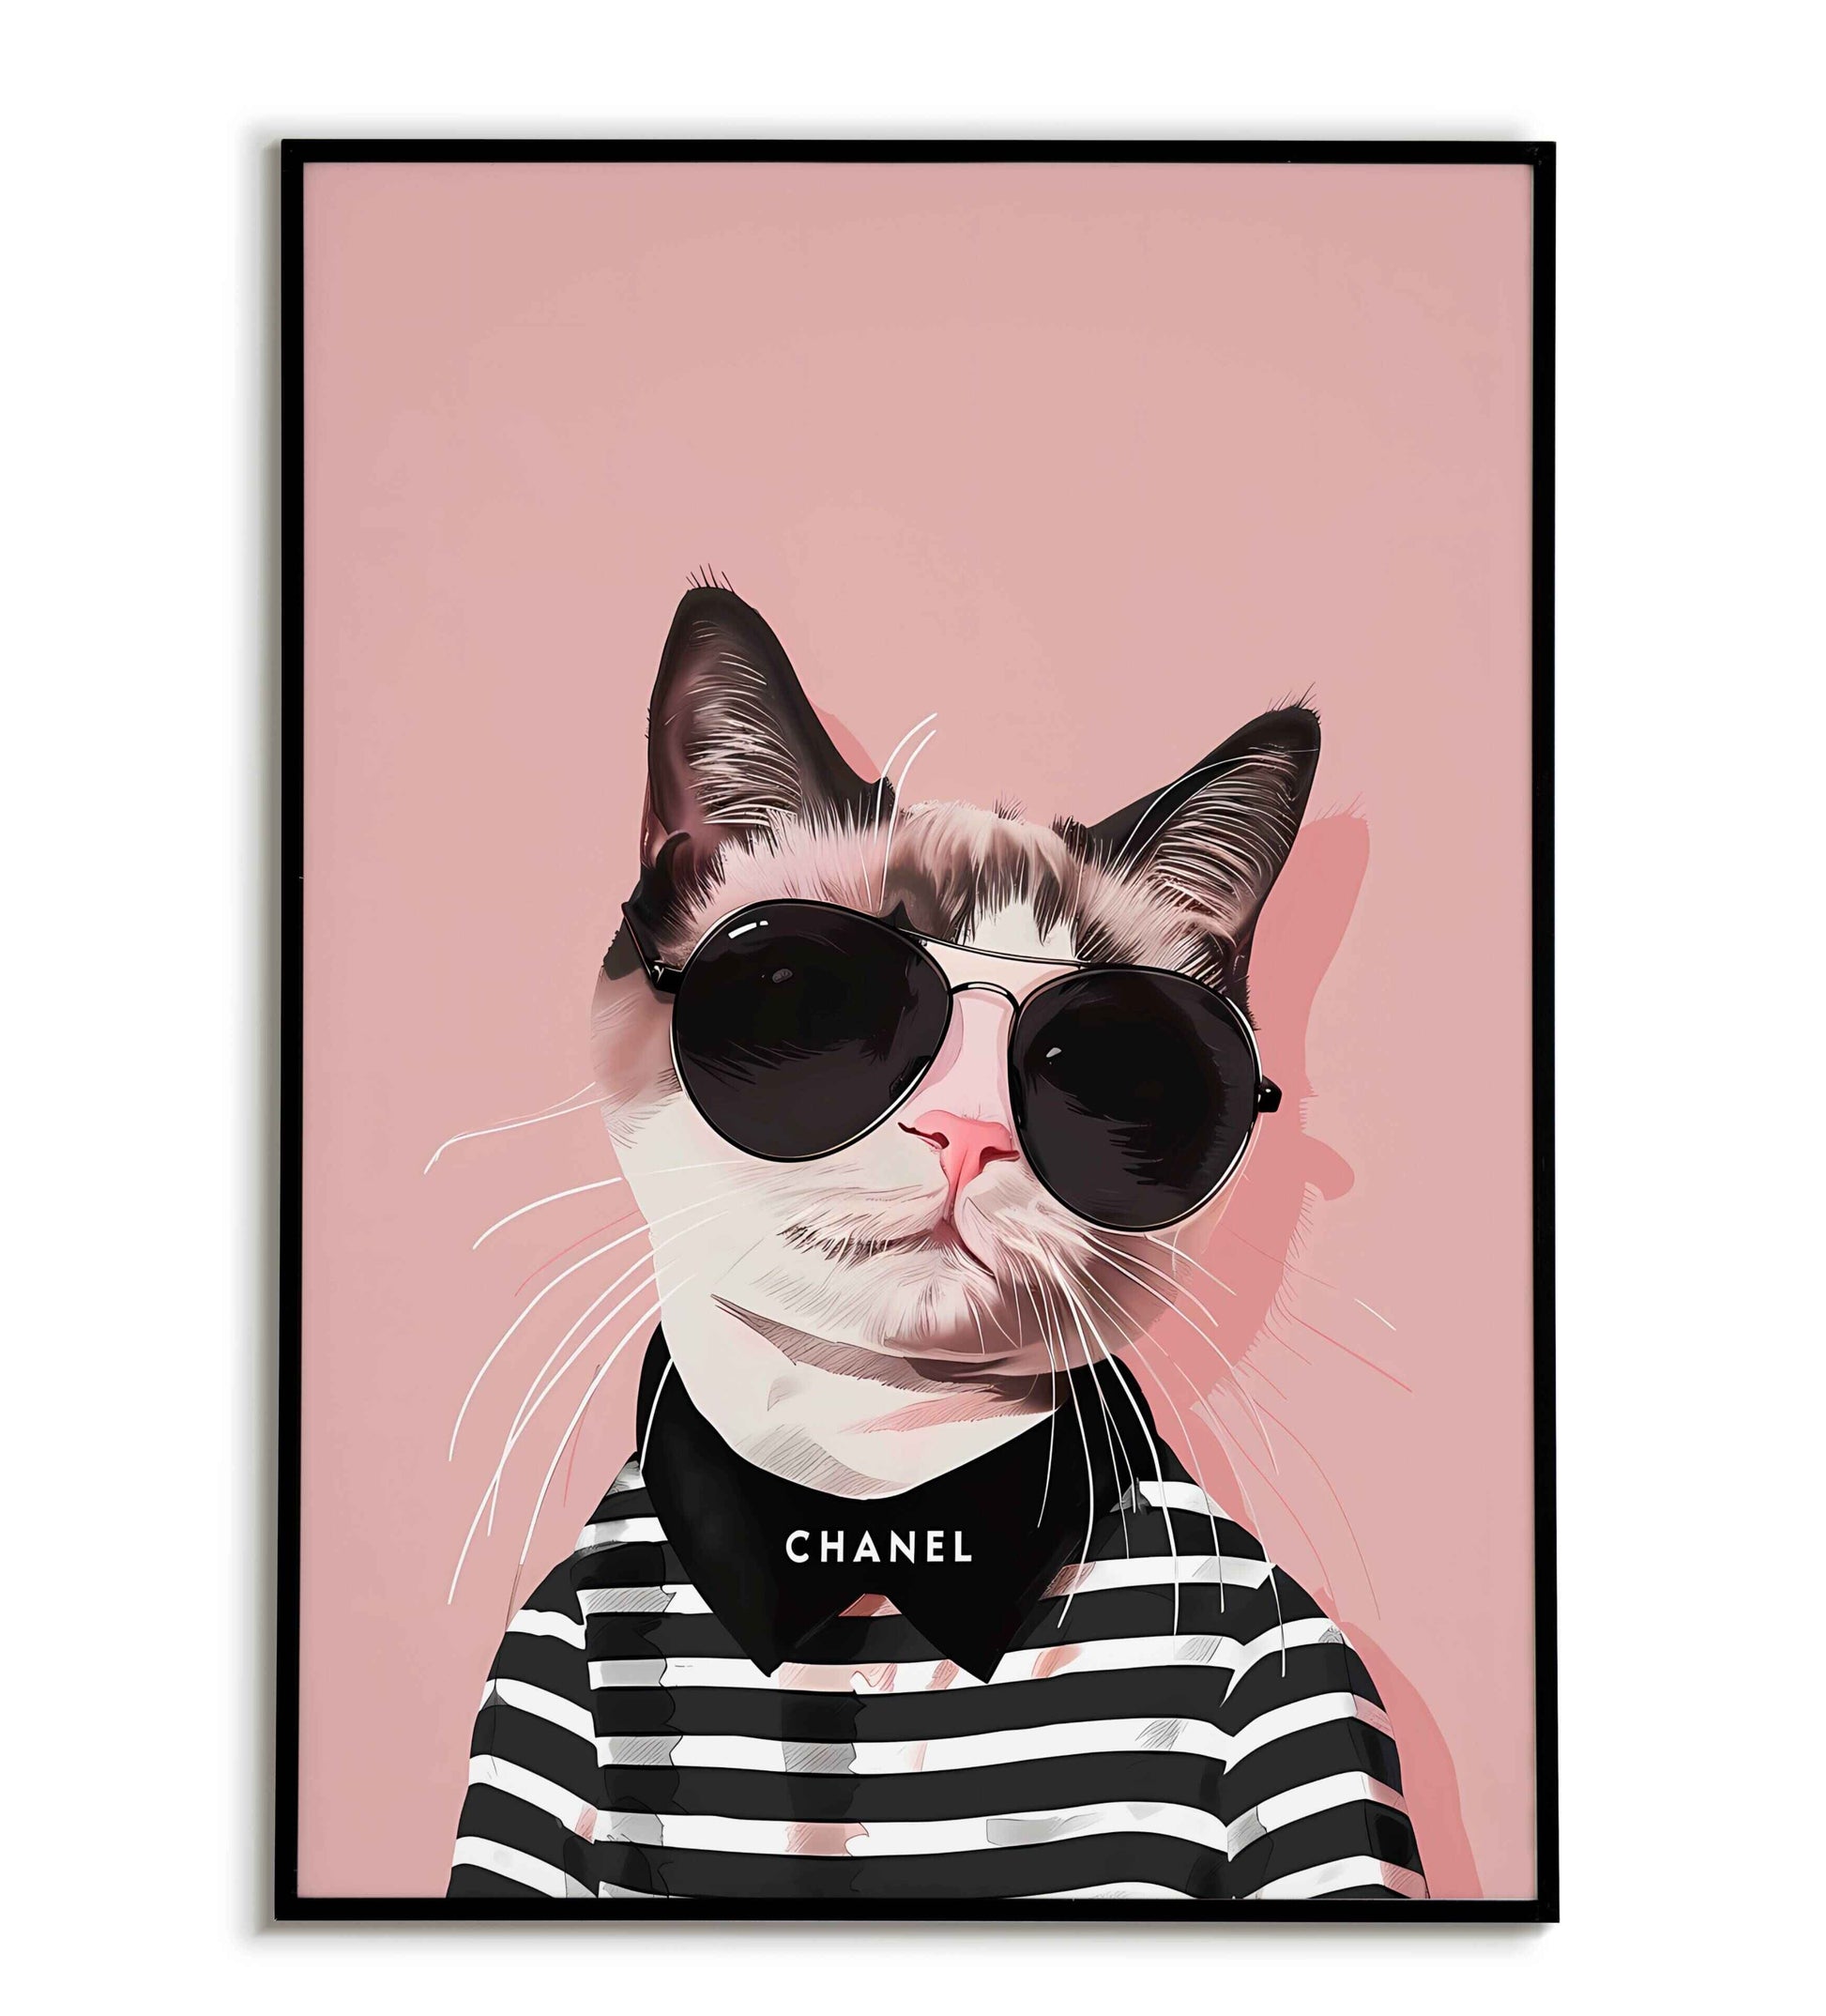 Cool Kitten(2 of 2) printable poster. Available for purchase as a physical poster or digital download.